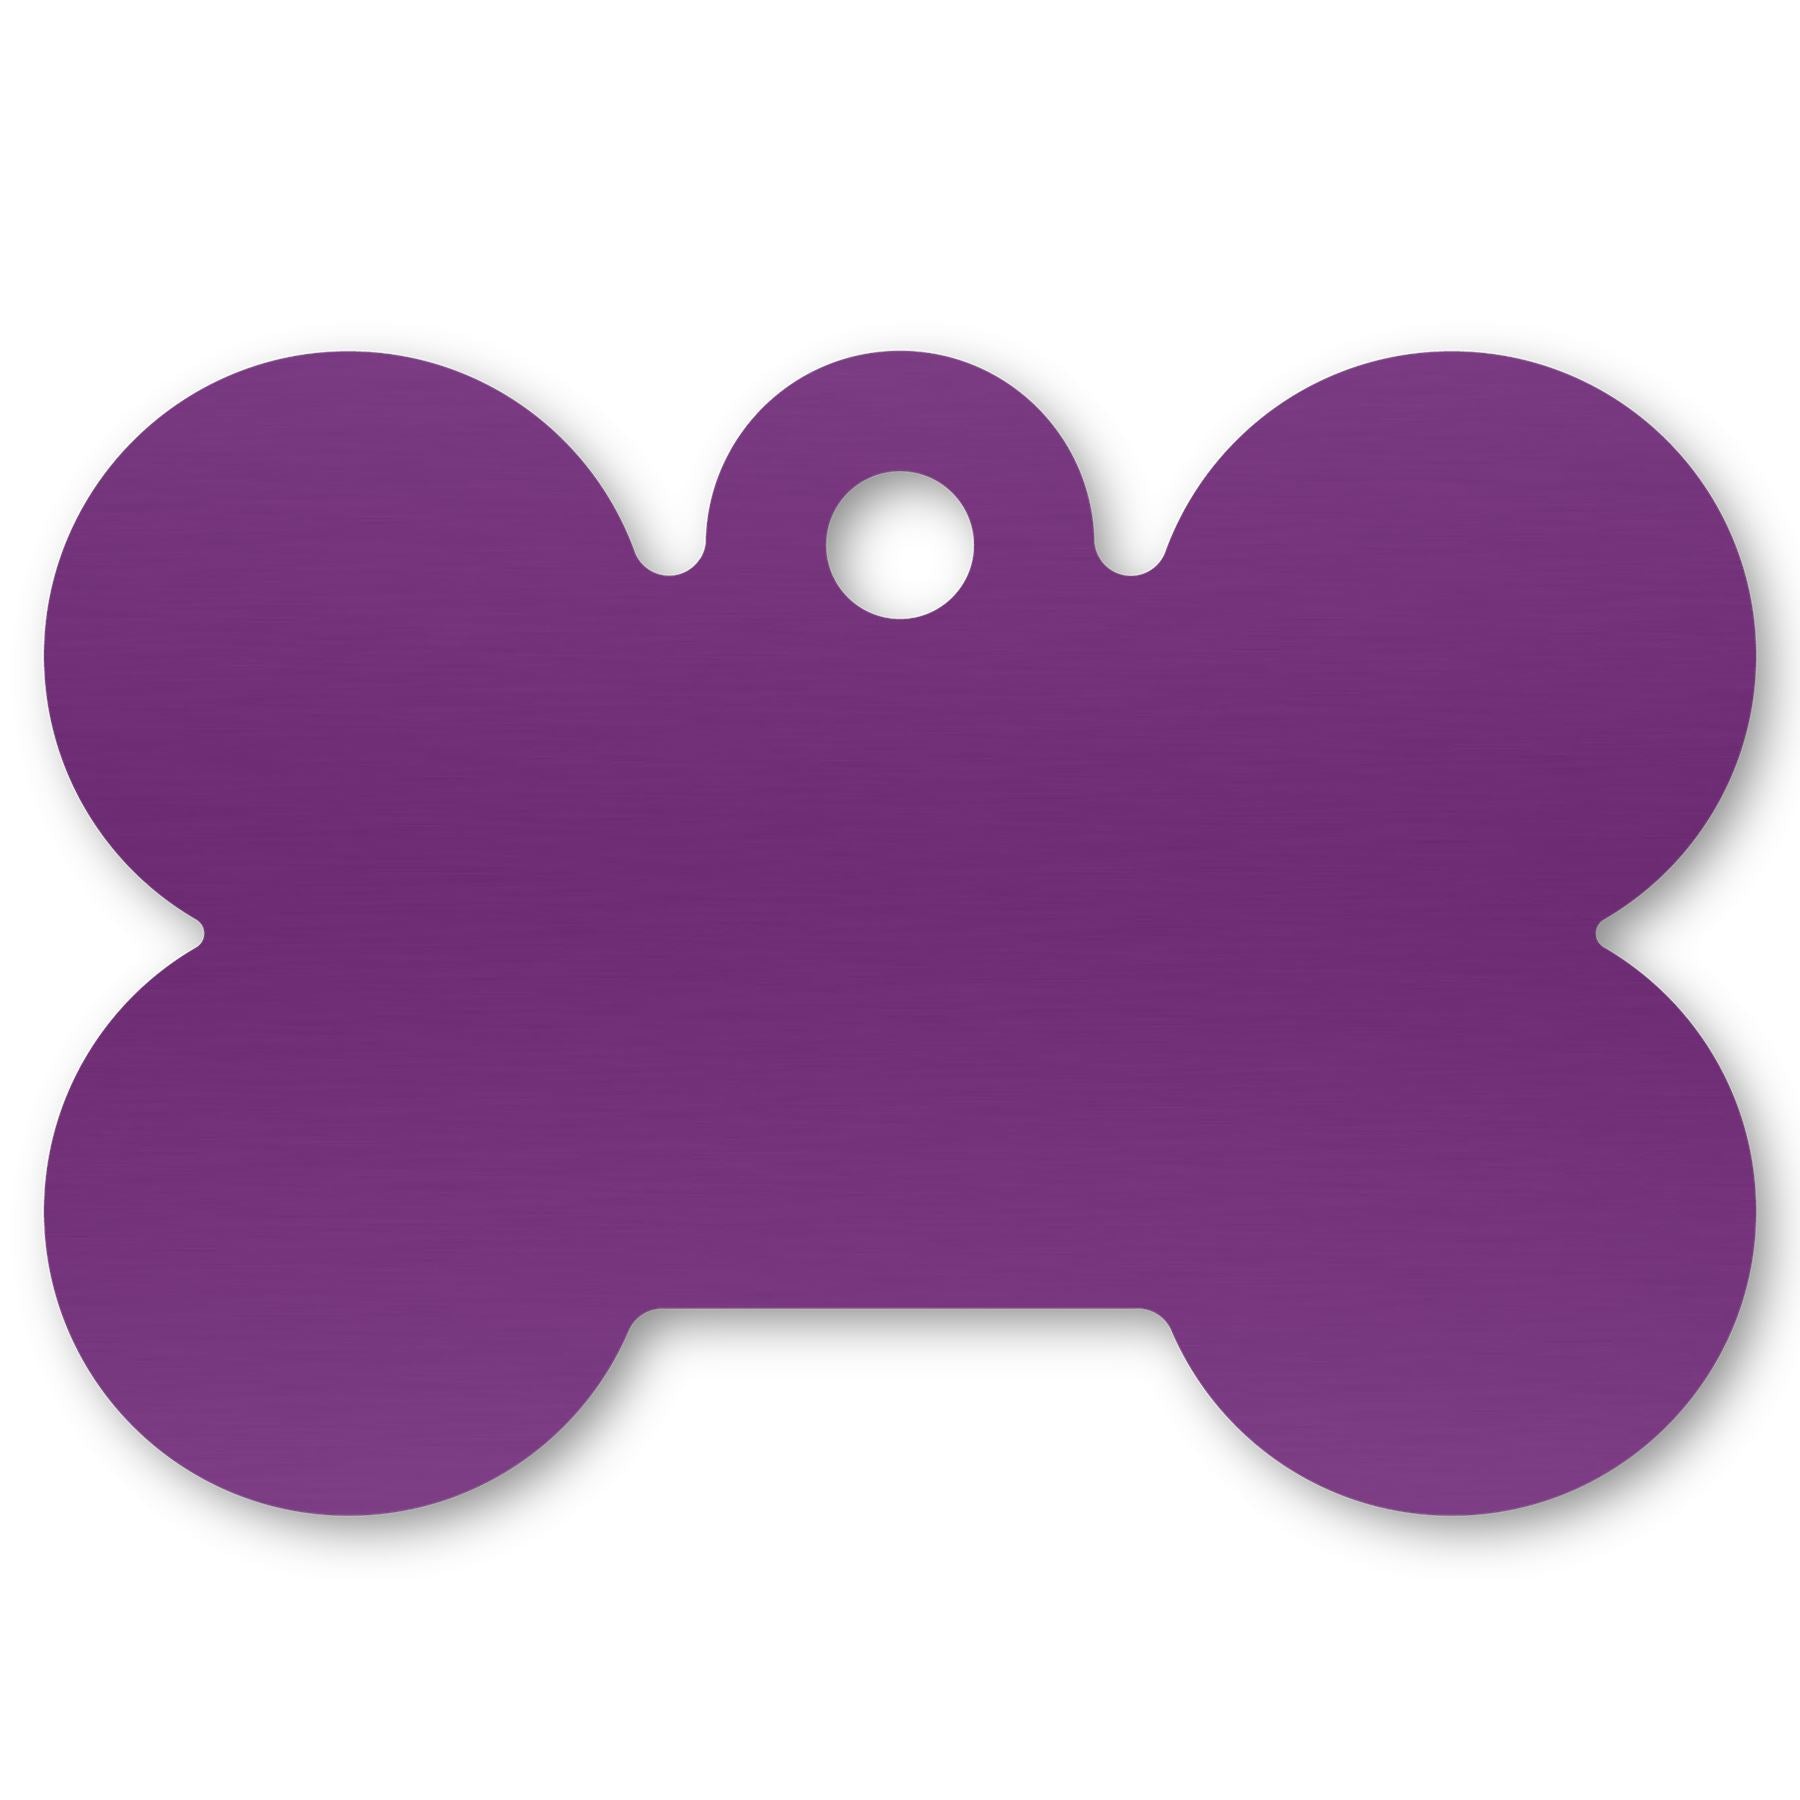 Anodized Aluminum Dog Bone Shaped Tags, 7/8" x 1-3/16" with 3/32" Hole, Laser Engraved Metal Tags Craftworks NW Purple 